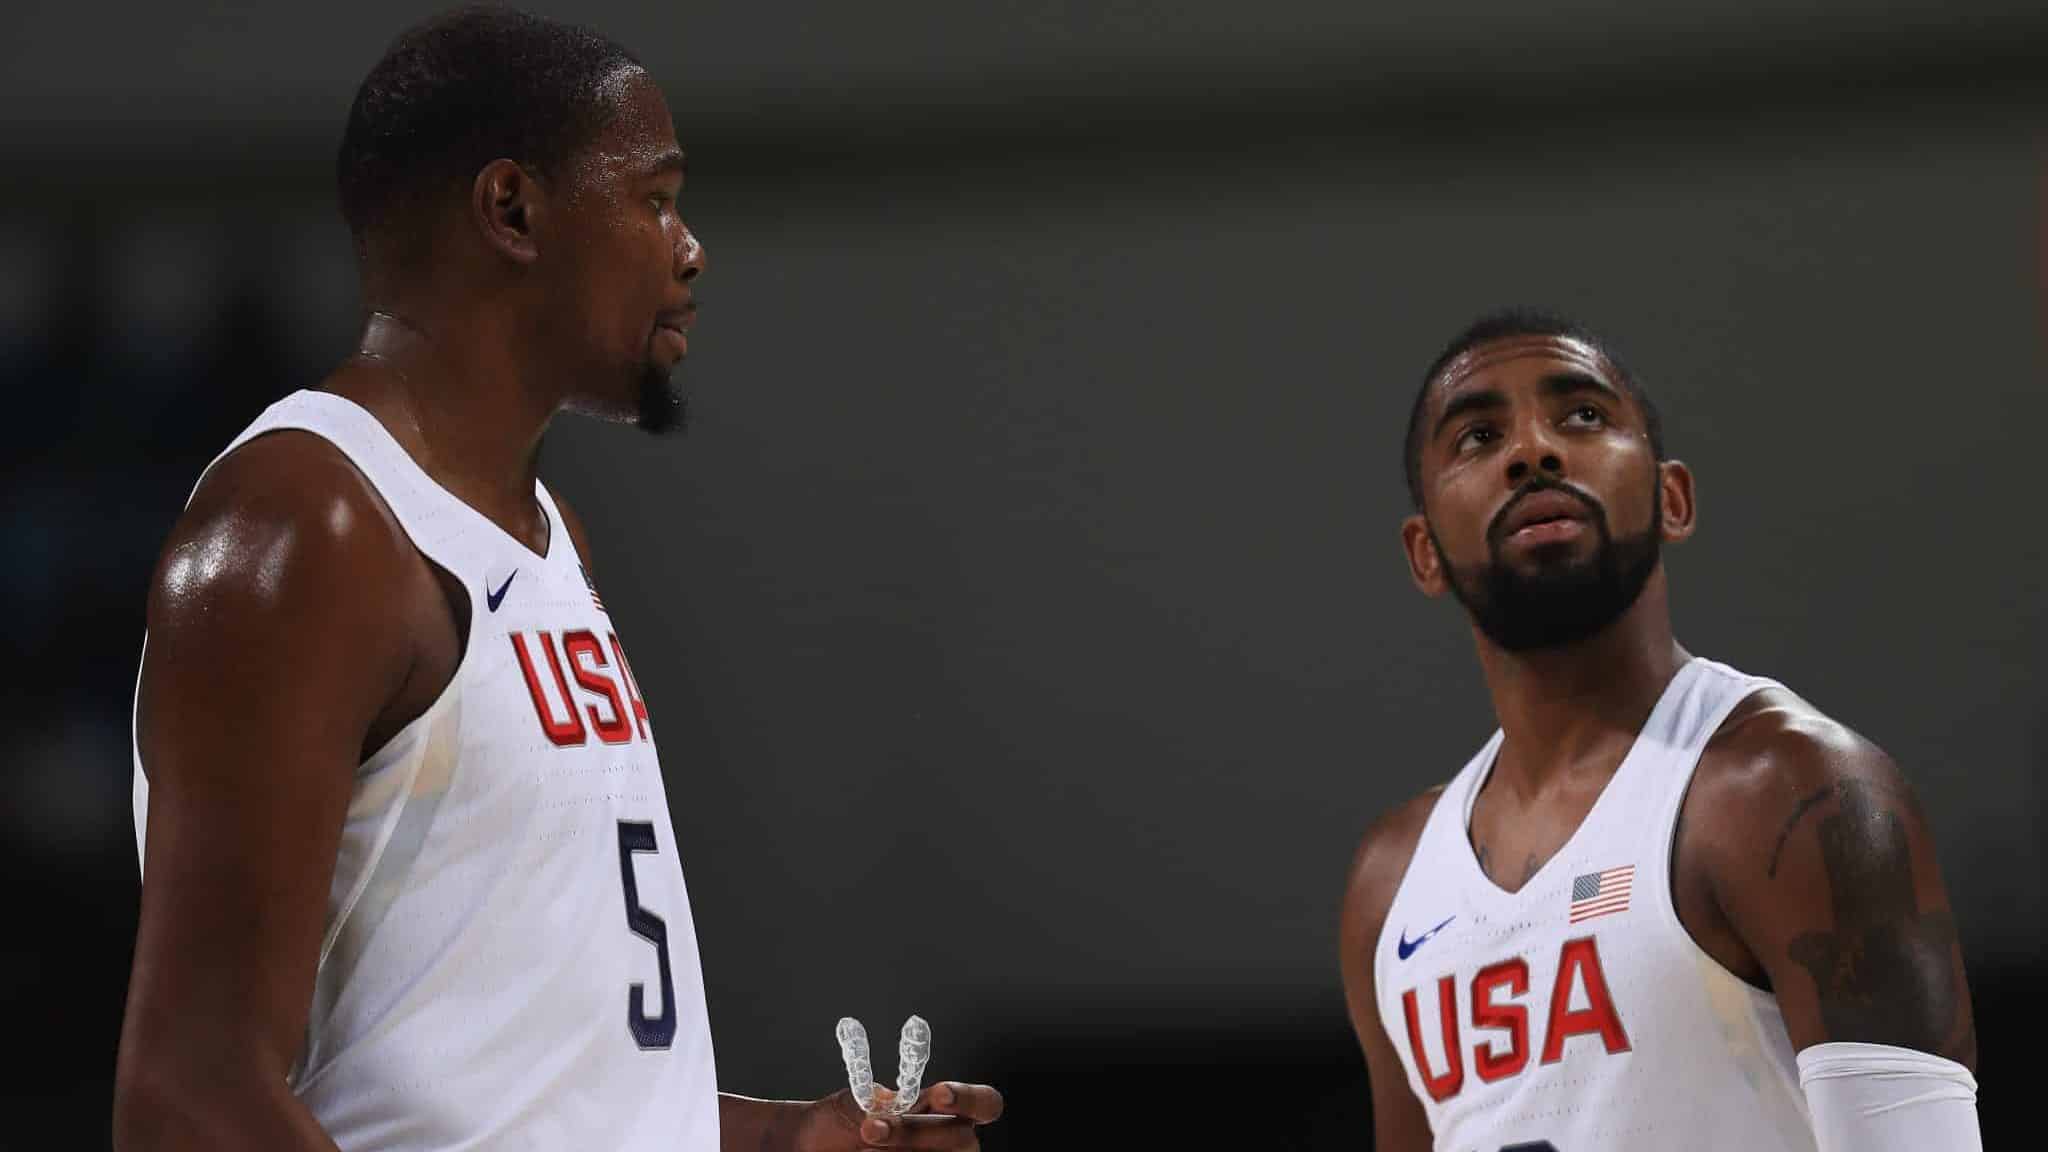 RIO DE JANEIRO, BRAZIL - AUGUST 08: Kevin Durant #5 and Kyrie Irving #10 of United States talk on the court during the Men's Priliminary Round between the United States and Venezuela on Day 3 of the Rio 2016 Olympic Games at Carioca Arena 1 on August 8, 2016 in Rio de Janeiro, Brazil.